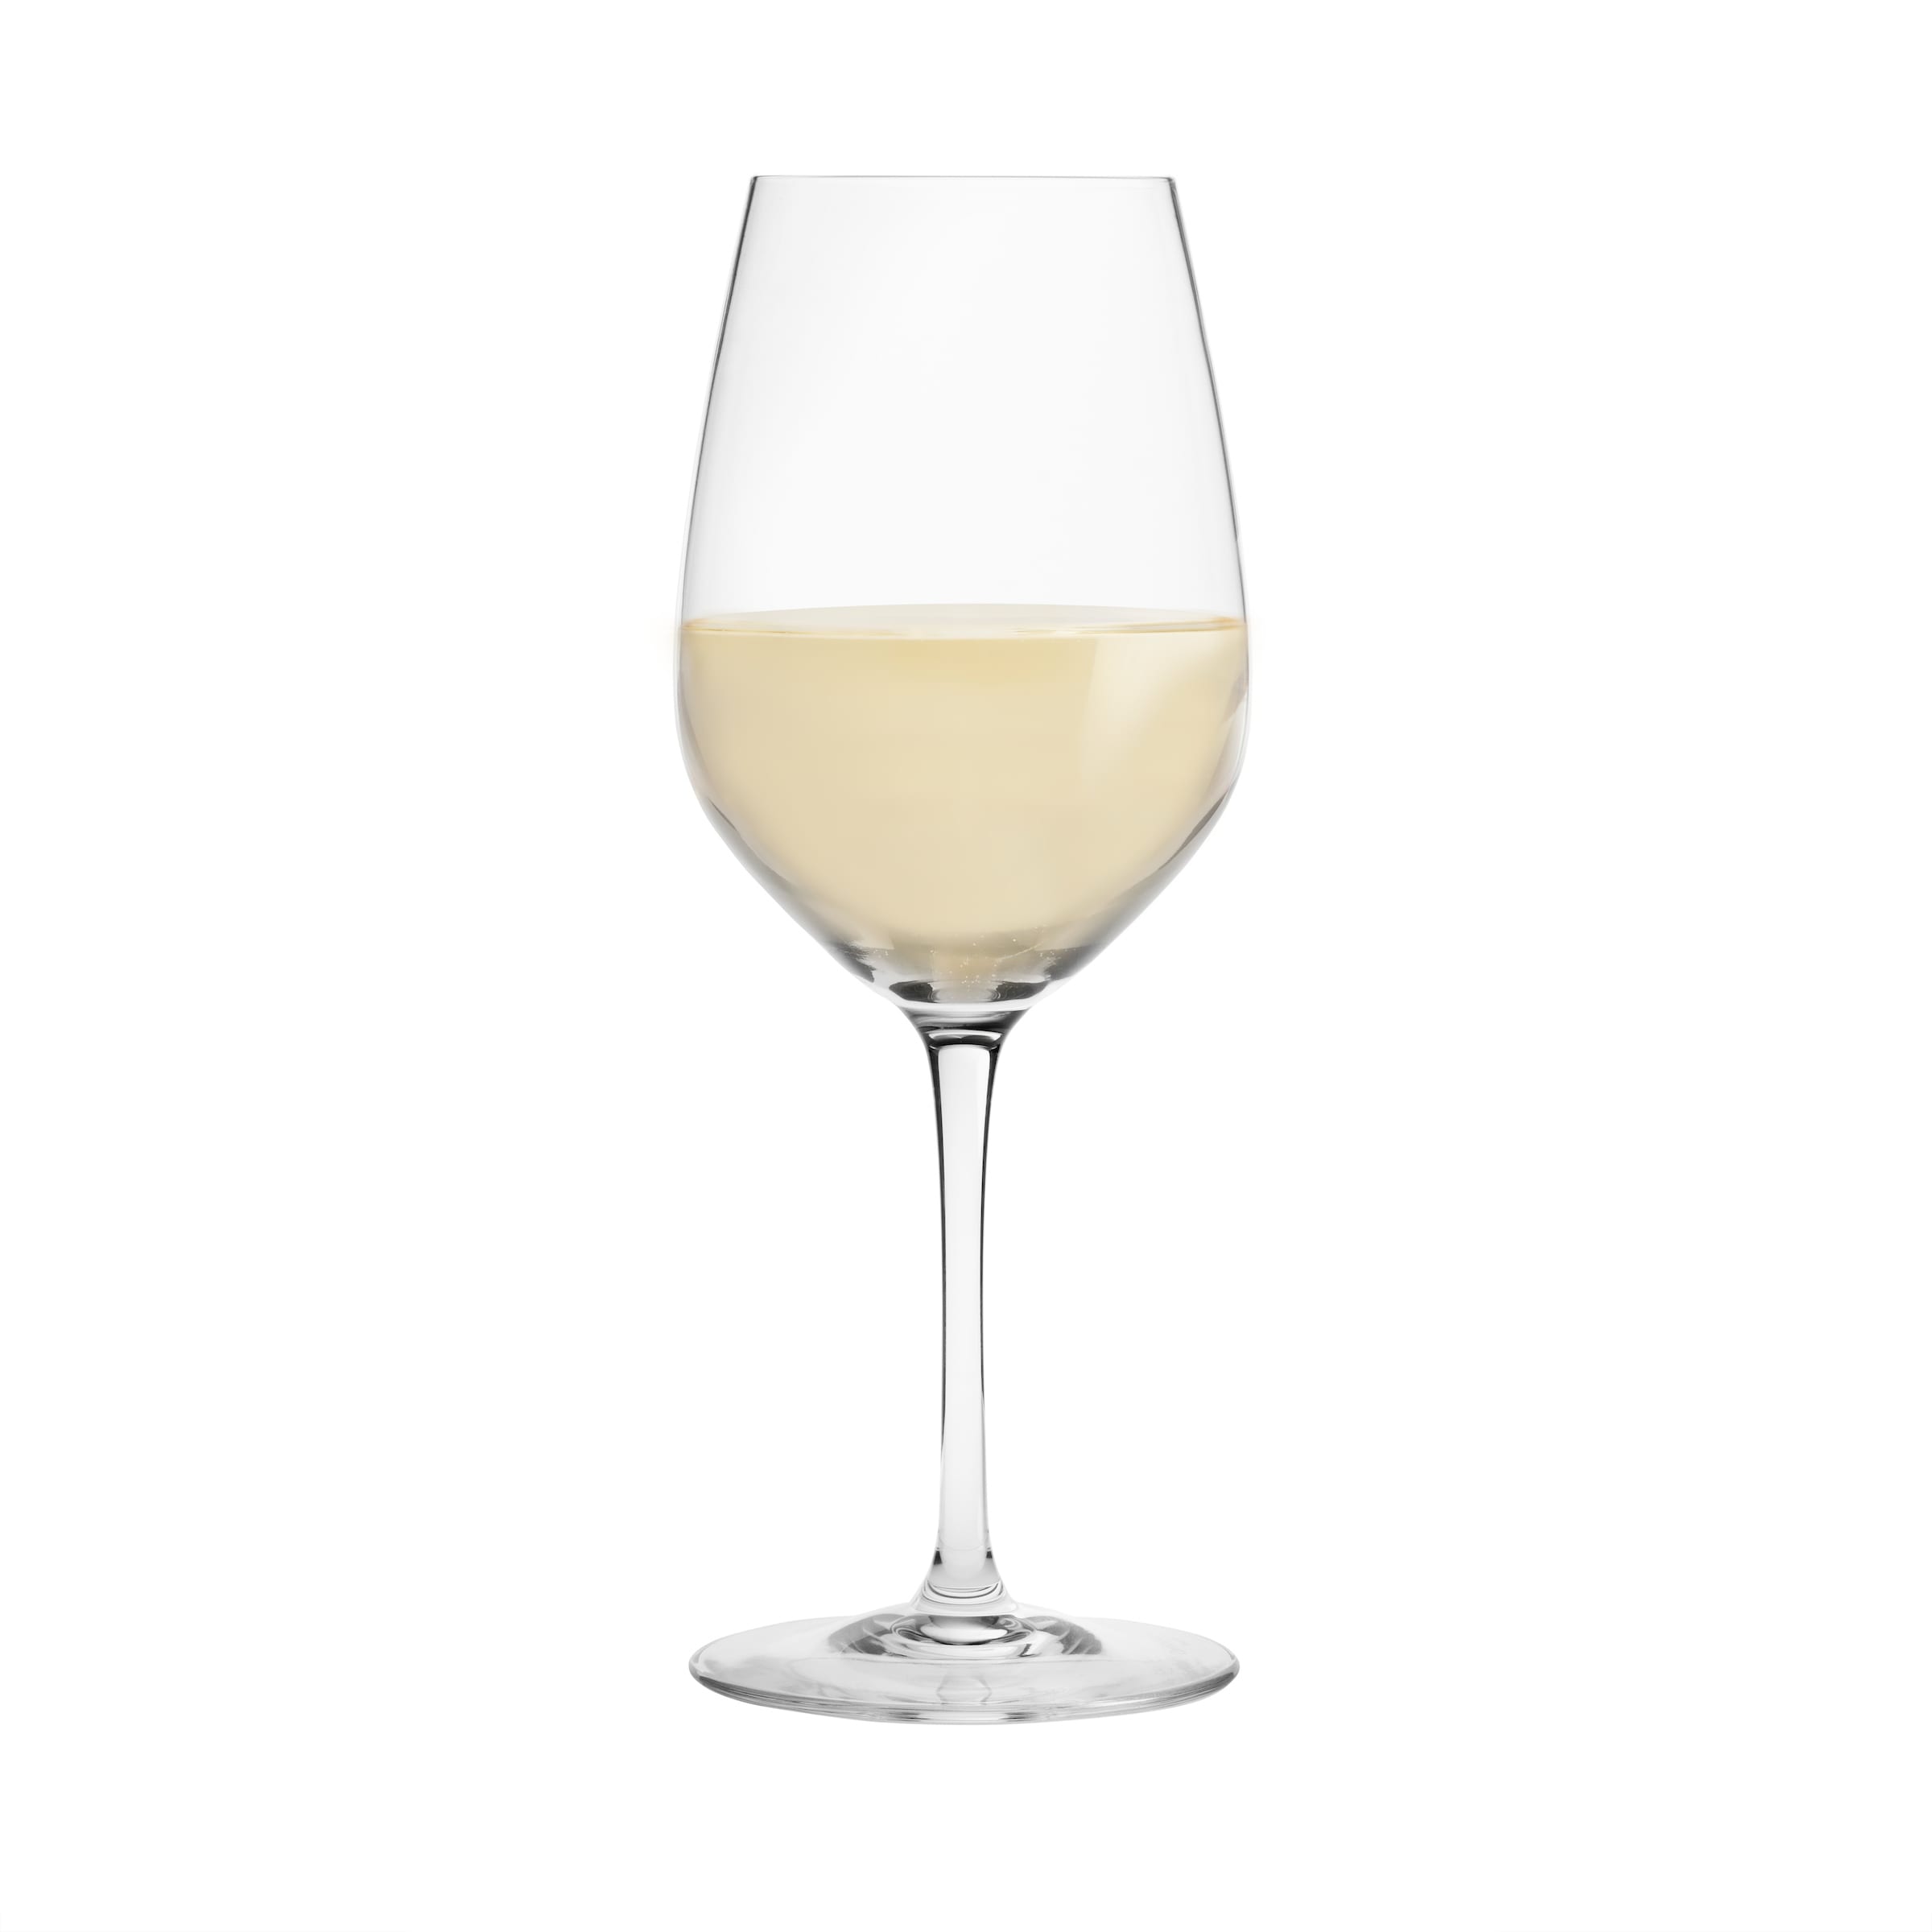 https://ak1.ostkcdn.com/images/products/is/images/direct/6e3a8ec04ed0b780d4e86f49fe2a17bcf07e658f/Chef-%26-Sommelier-Bellevue-16-Ounce-Tulip-Wine-Glass%2C-Set-of-6.jpg